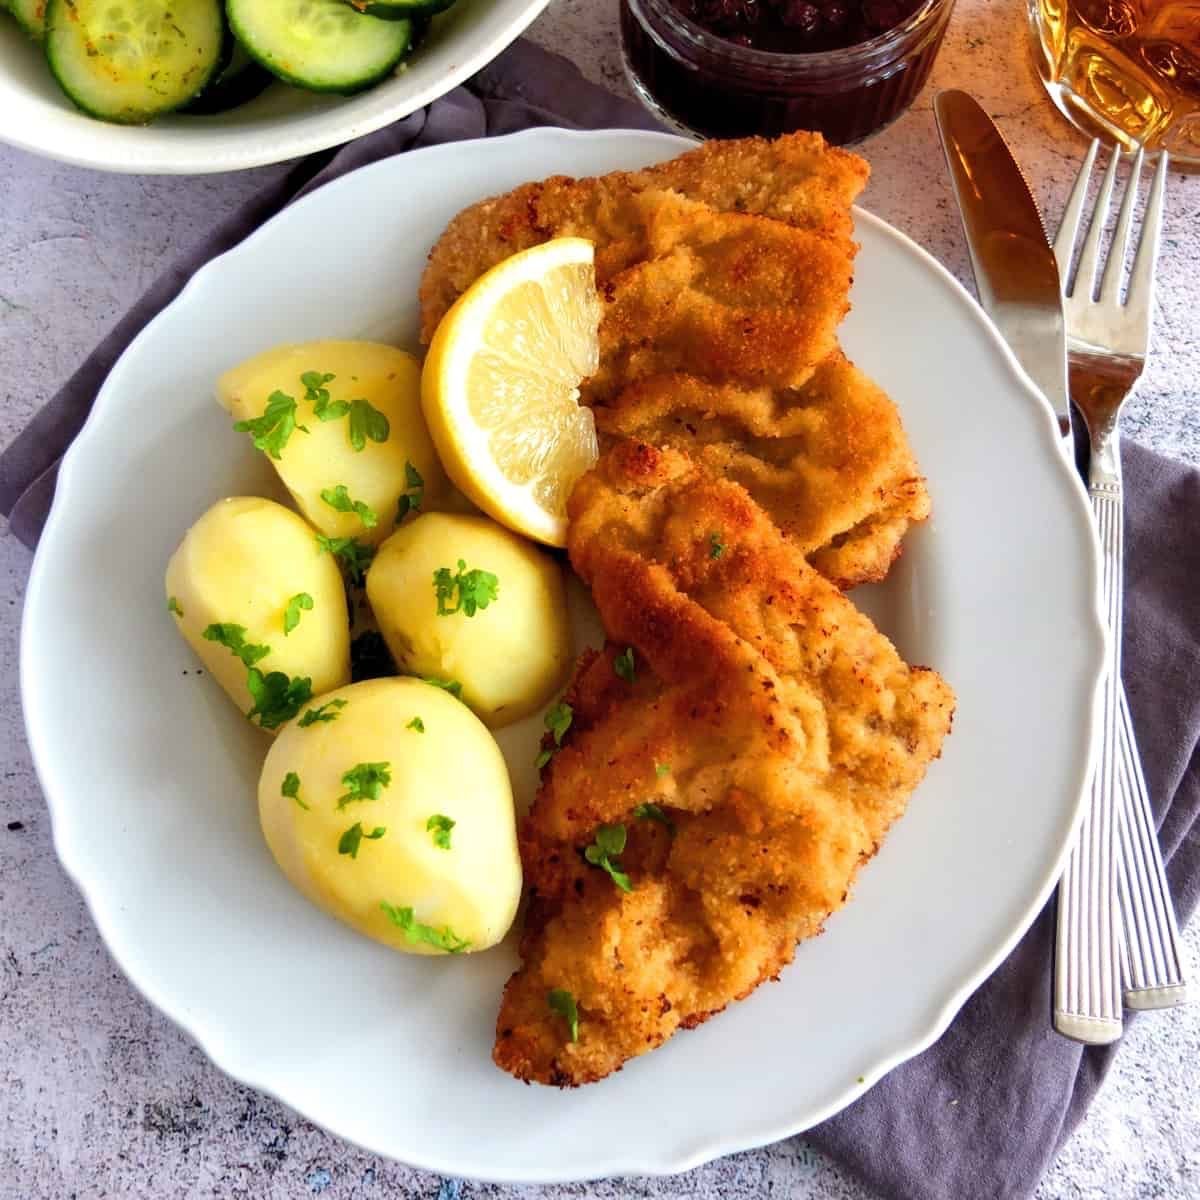 The Wiener Schnitzel is the original cutlet of Vienna made with Veal, fried to golden perfection for you to try at Tisza. Book your reservation today at Tiszabistro.com #sonomacounty #healdsburg #healdsburgrestaurant 
#winecountry
#shophealdsburg
#so